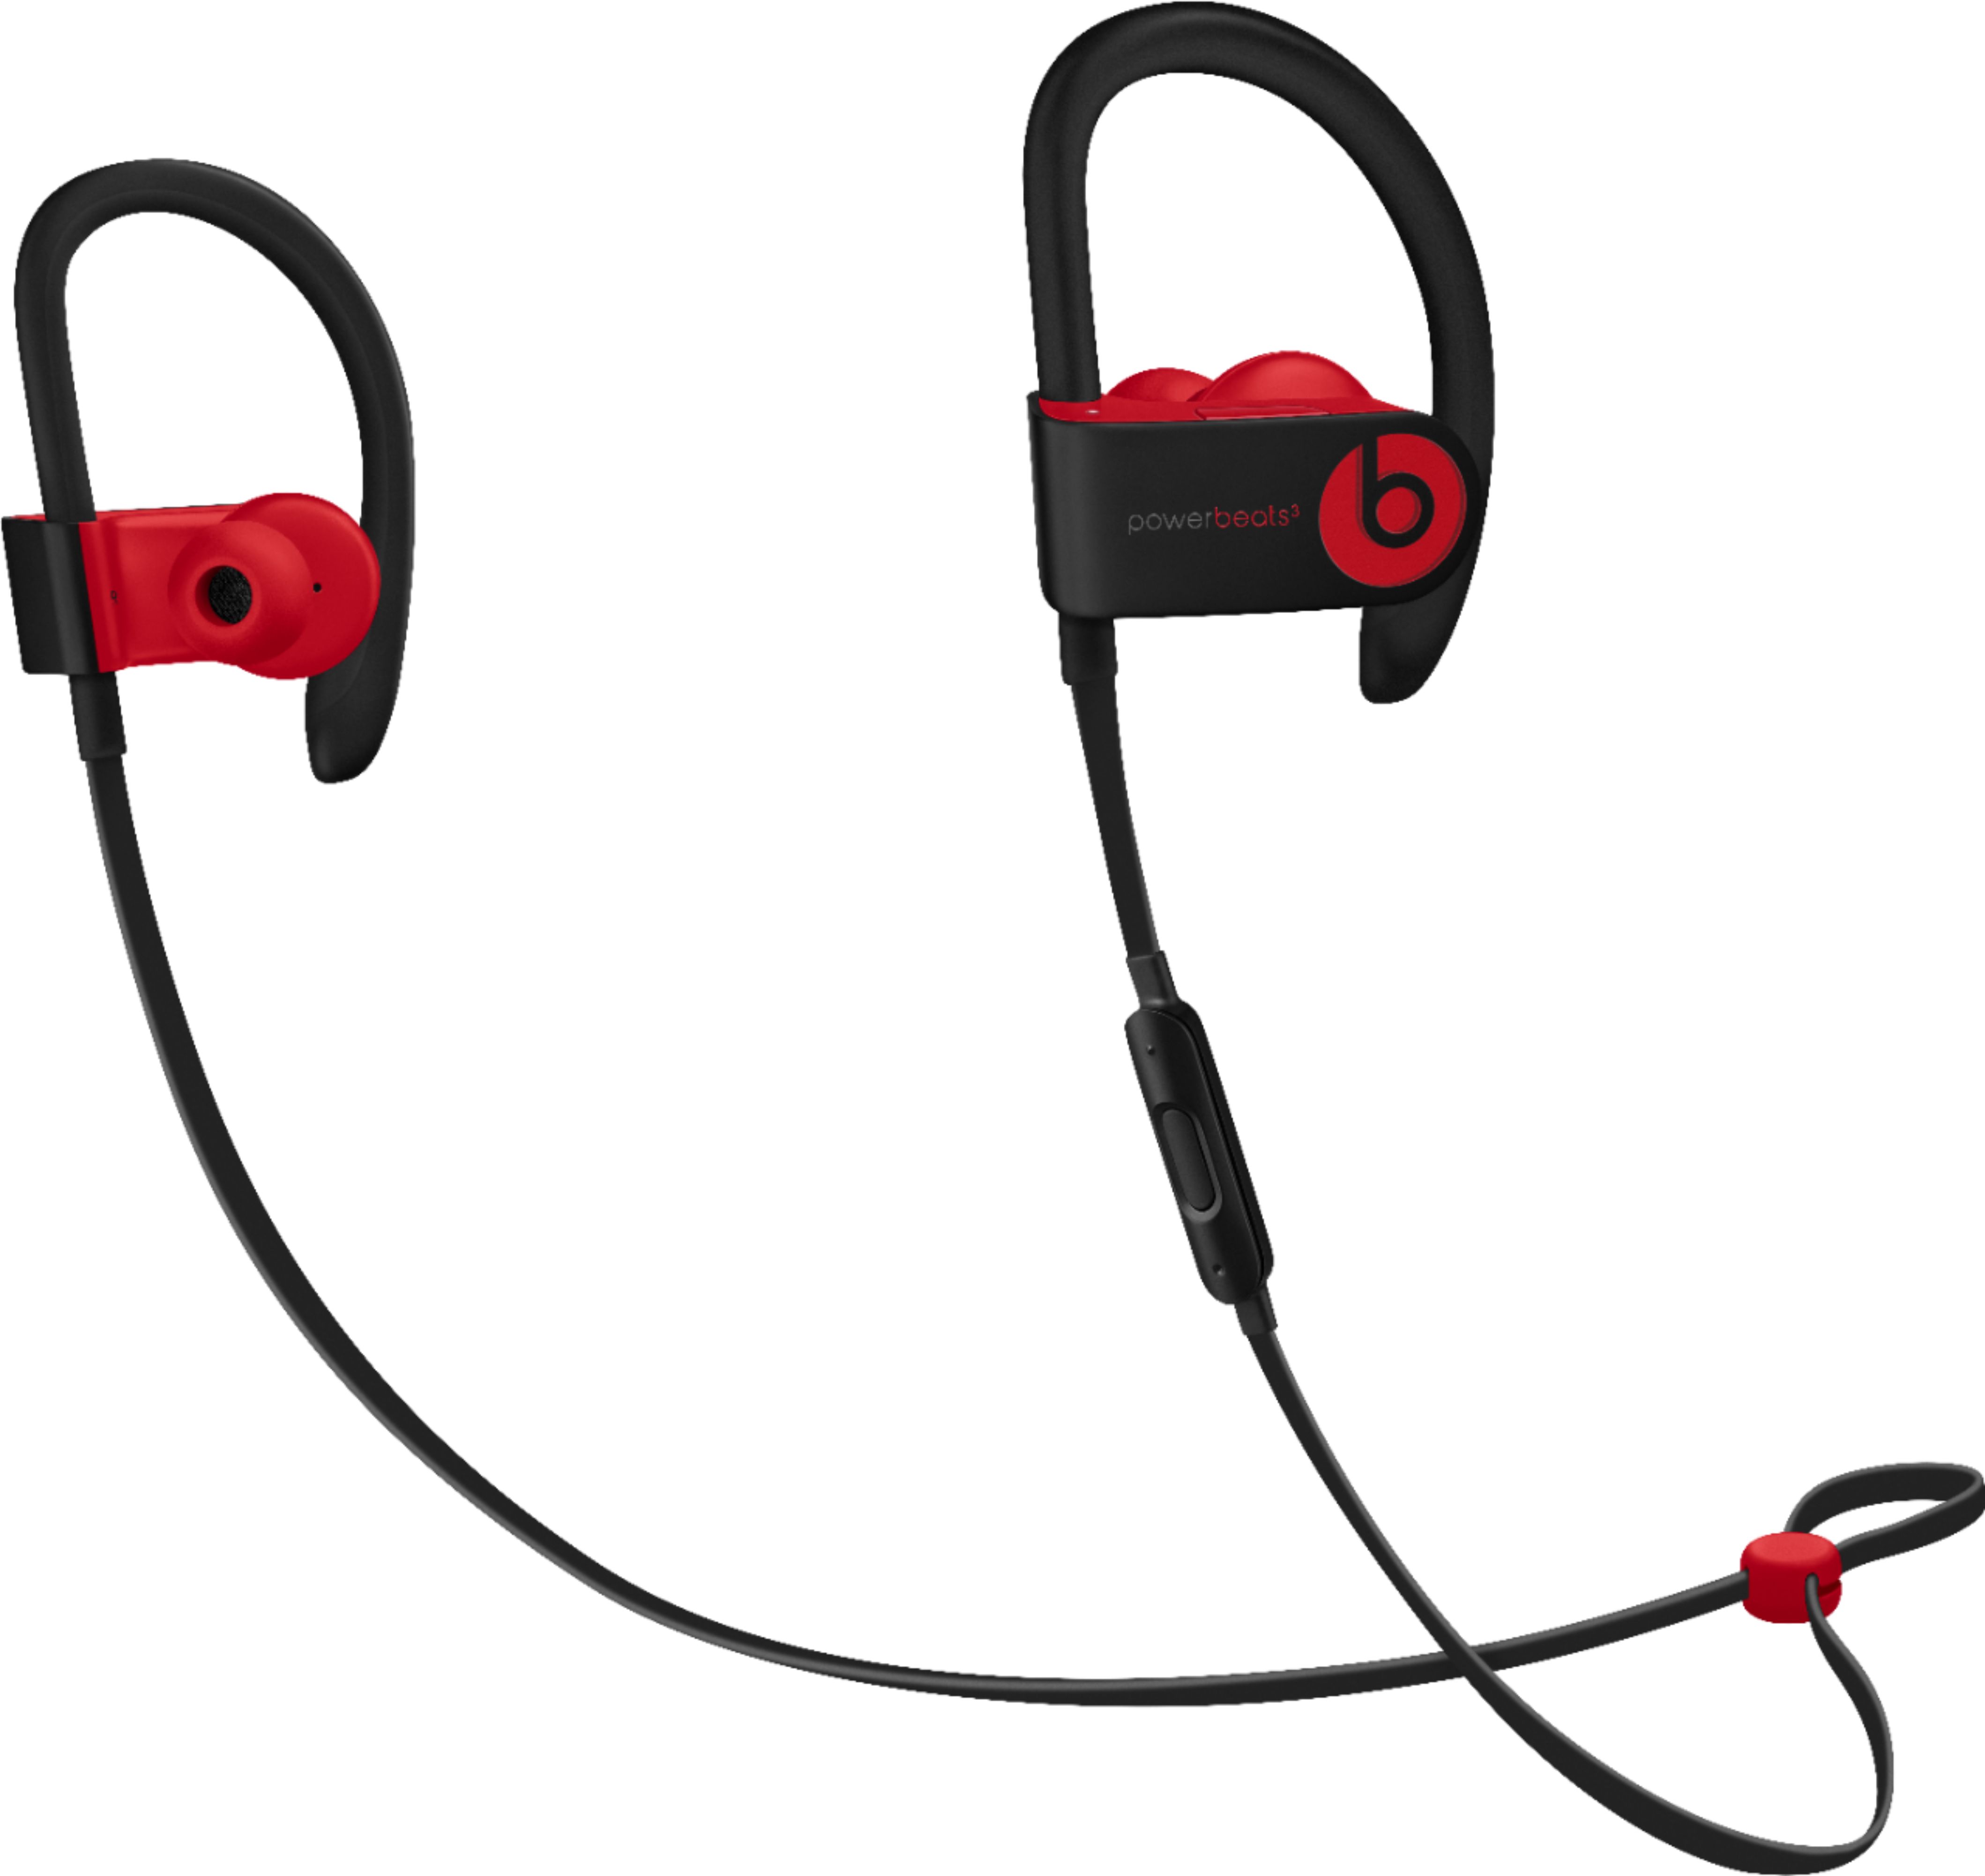 powerbeats 3 wireless red and black